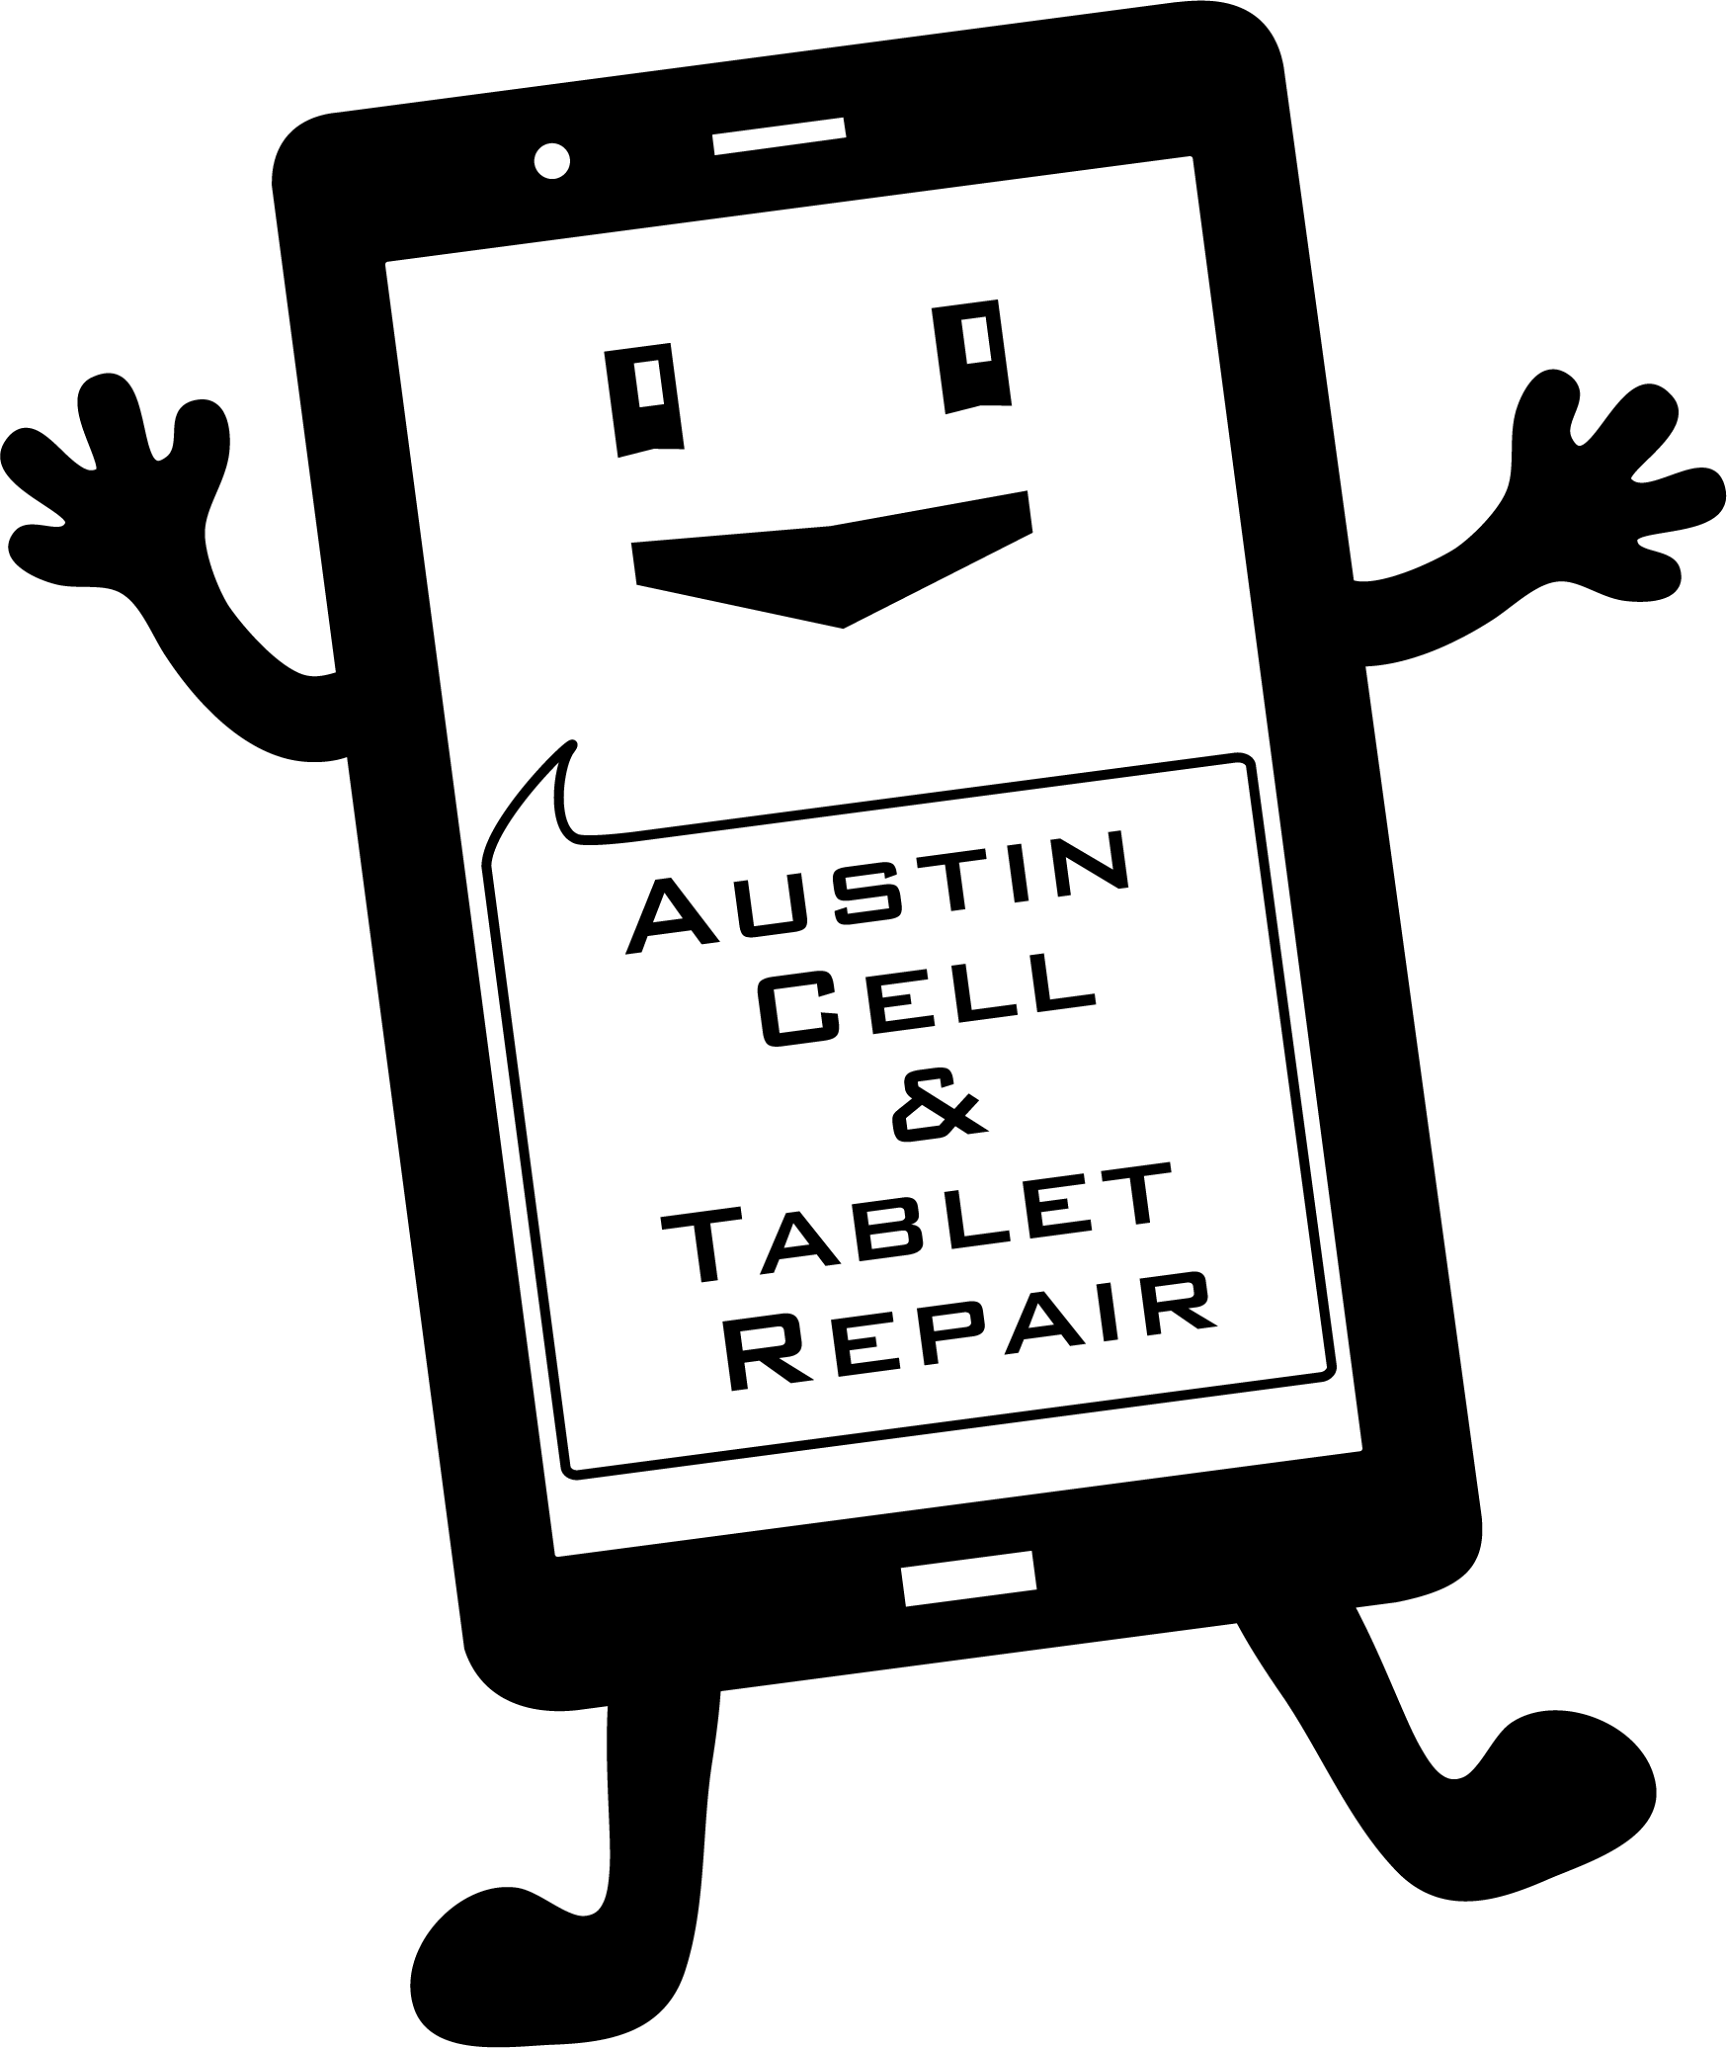 Company logo of Austin Cell and Tablet Repair